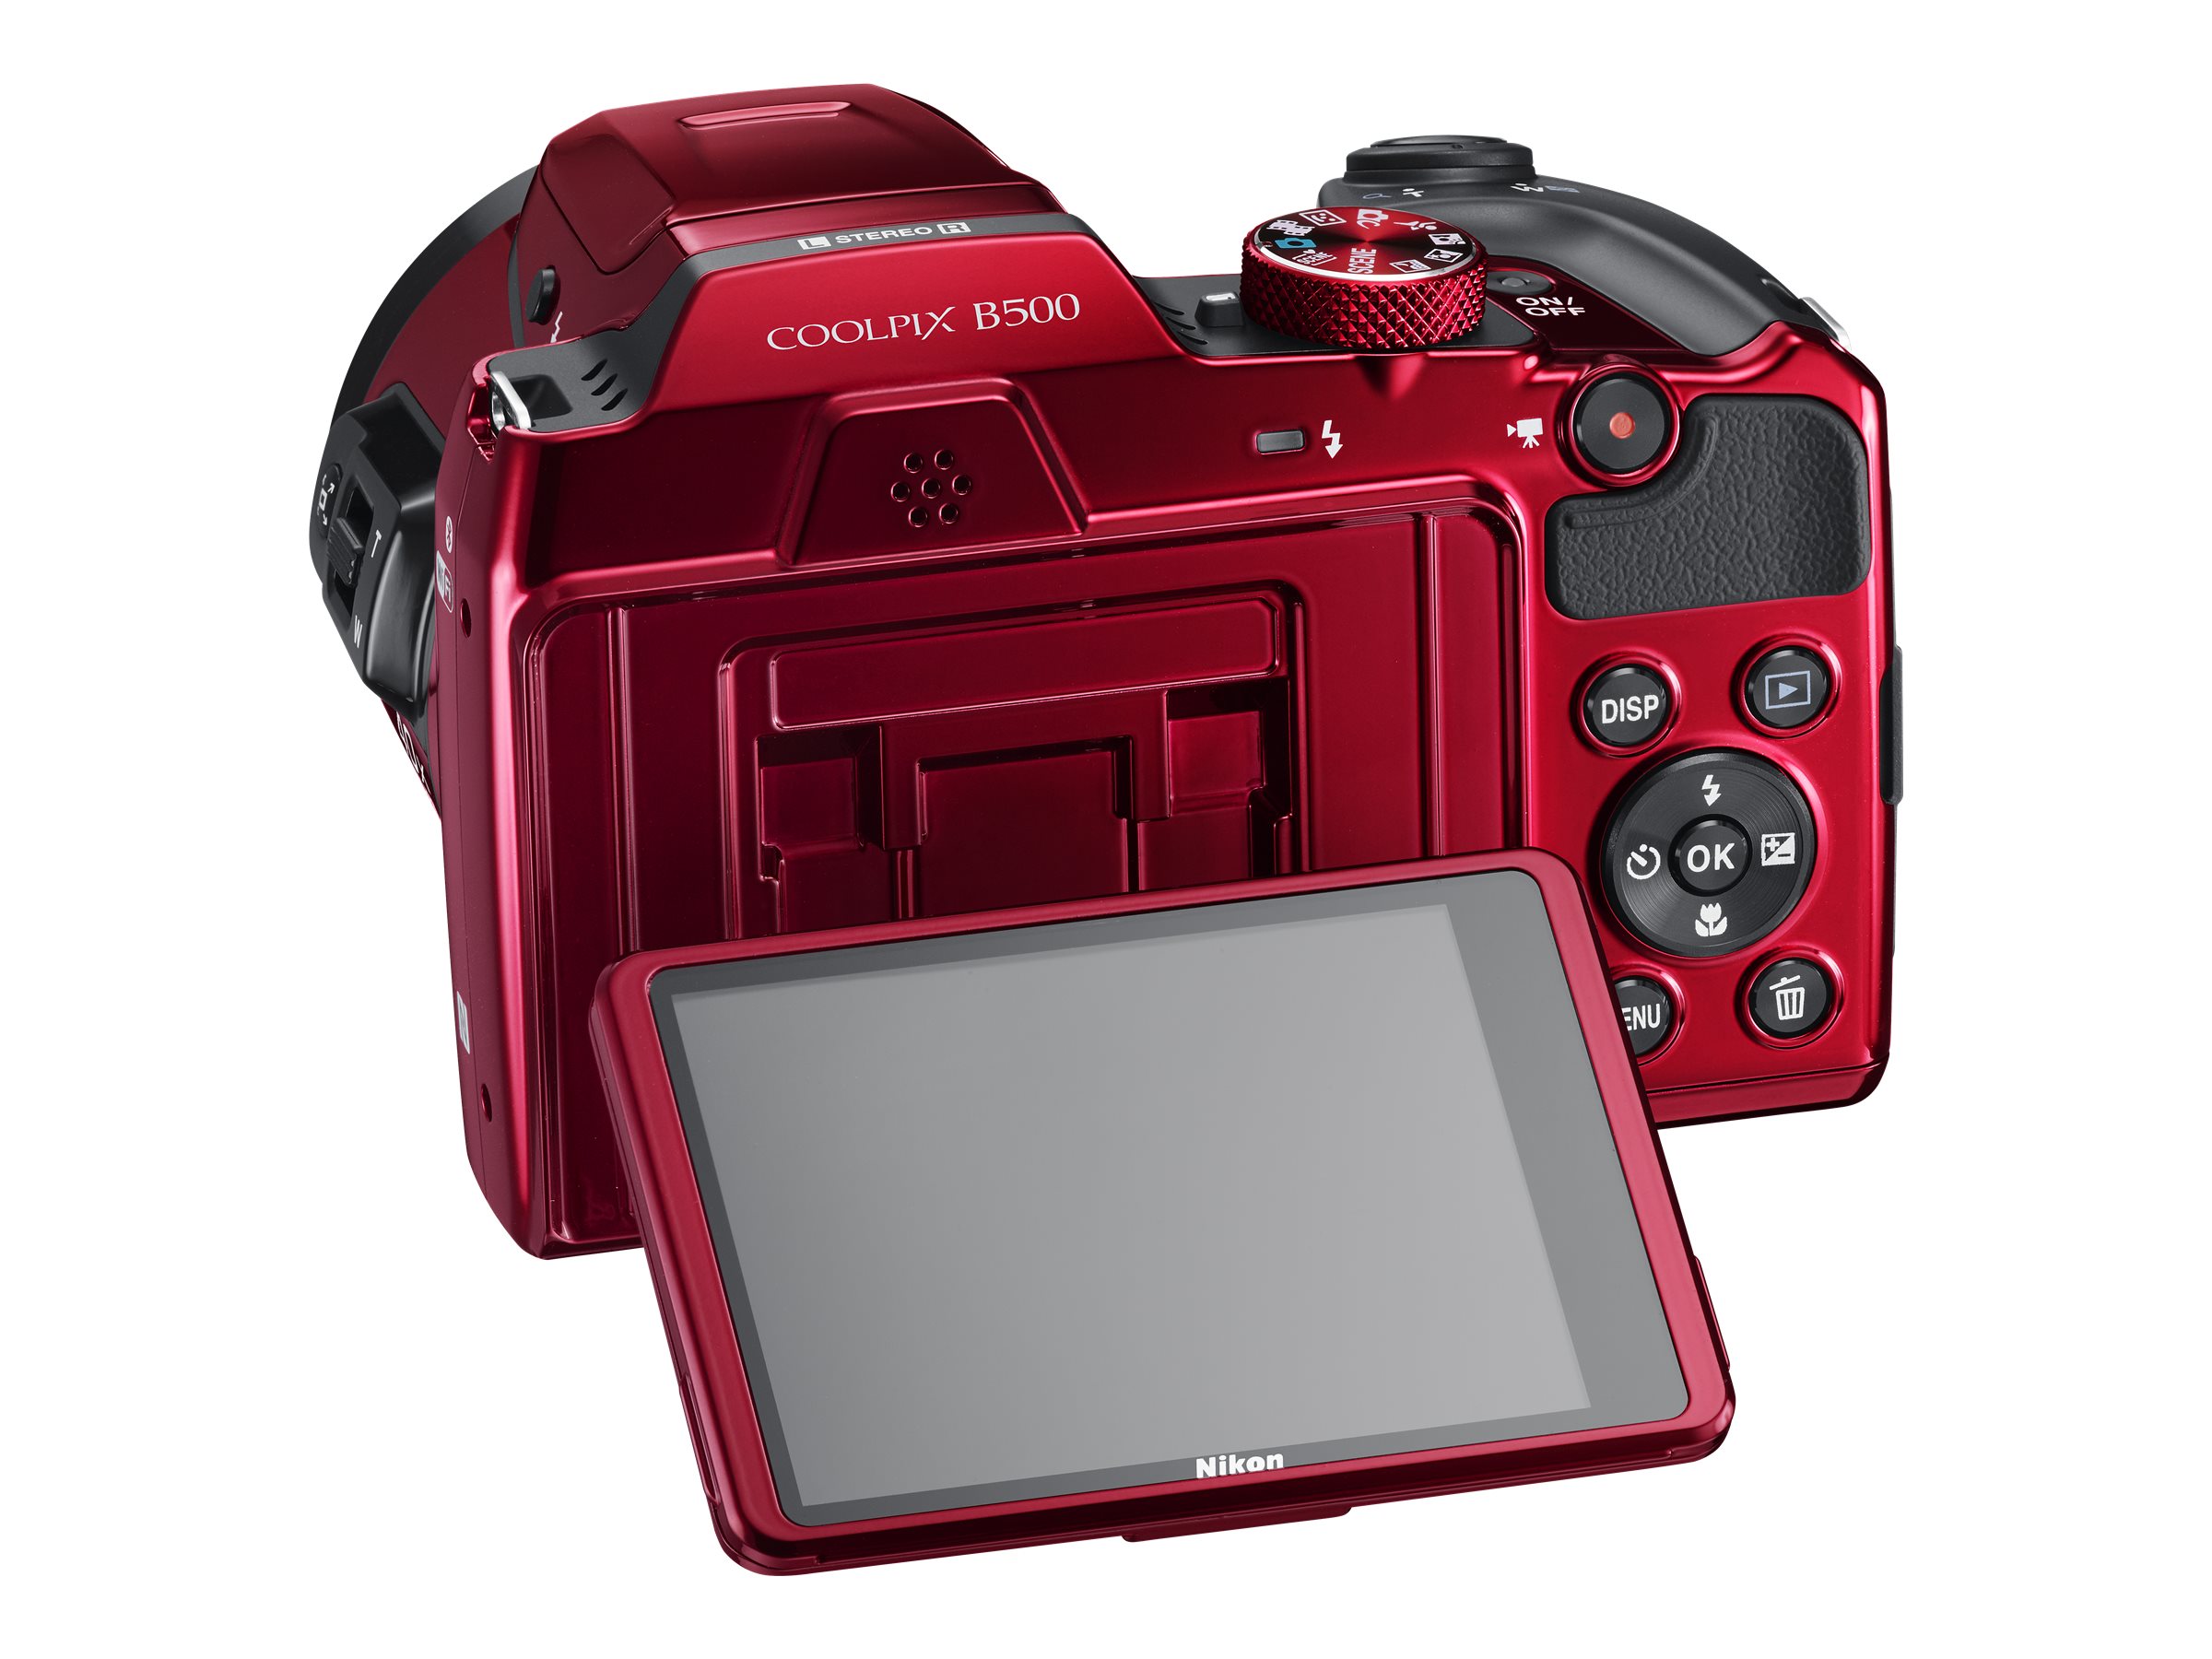 Nikon Red COOLPIX B500 Digital Camera with 16 Megapixels and 40x Optical Zoom - image 10 of 11